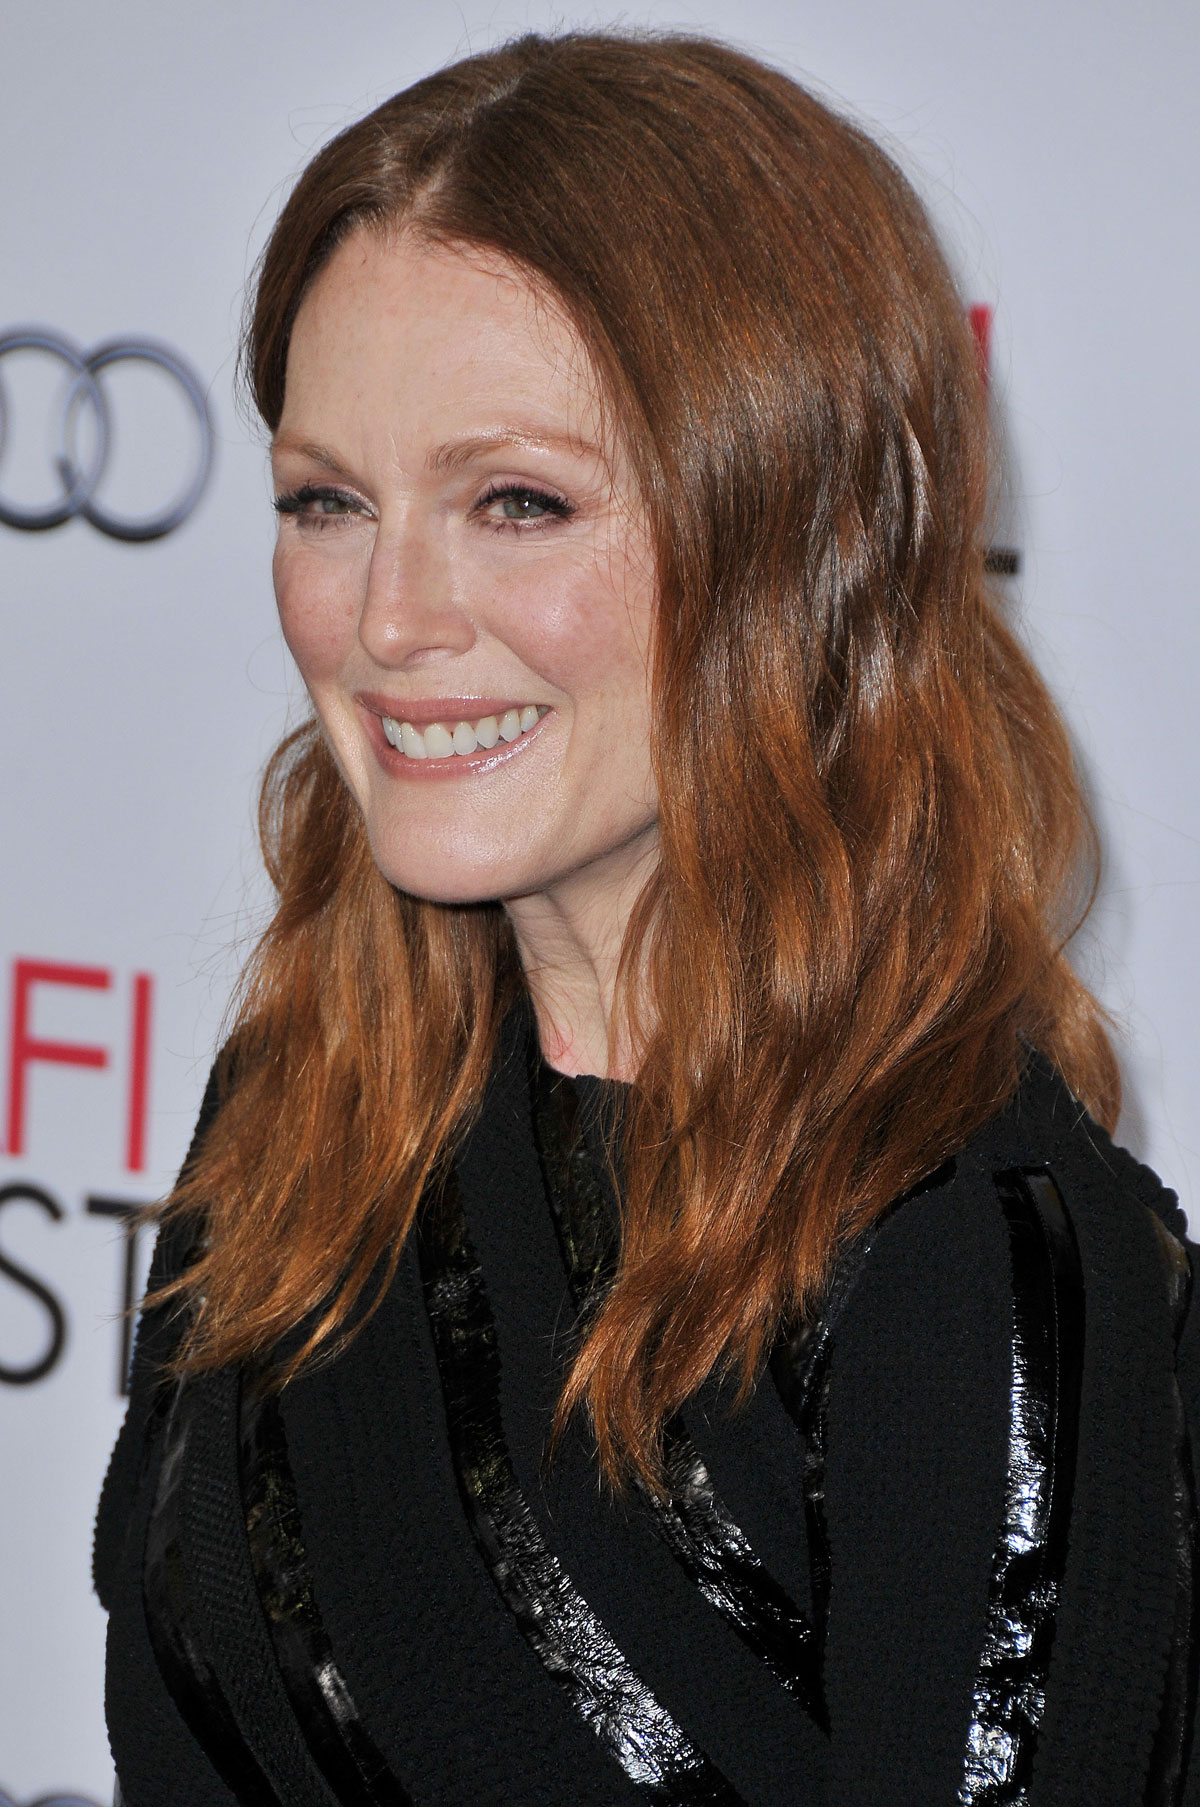 Julianne Moore on the red carpet at the premiere of Still Alice